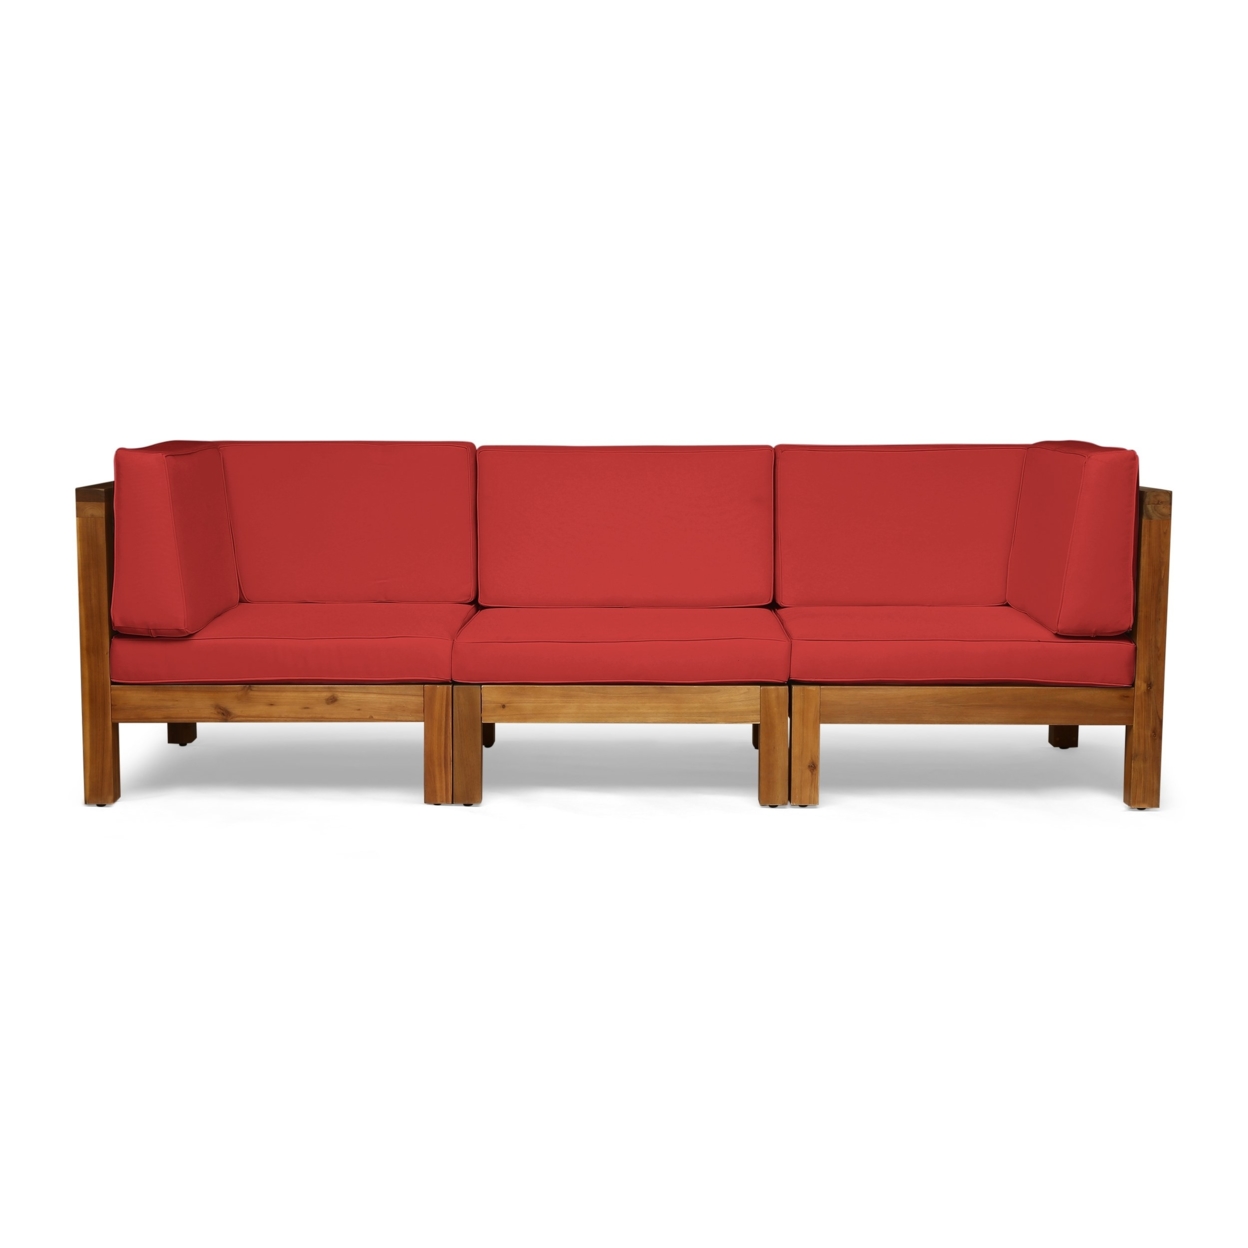 Dawson Outdoor Sectional Sofa Set - 3-Seater - Acacia Wood - Outdoor Cushions - Red, Teak